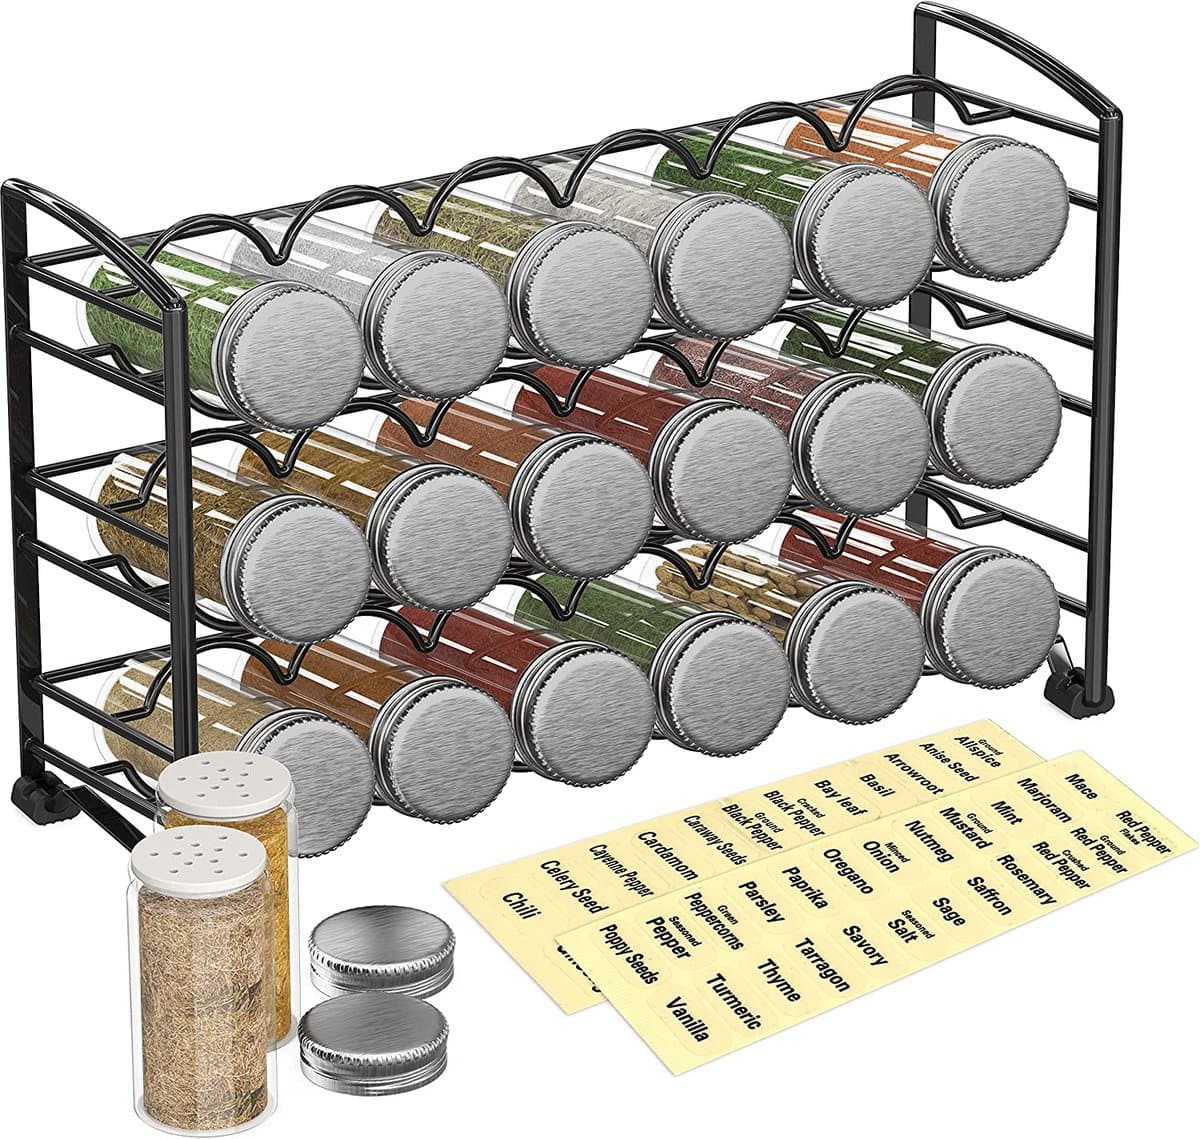 Kitchen organization ideas - a spice rack with glass bottles and labels.